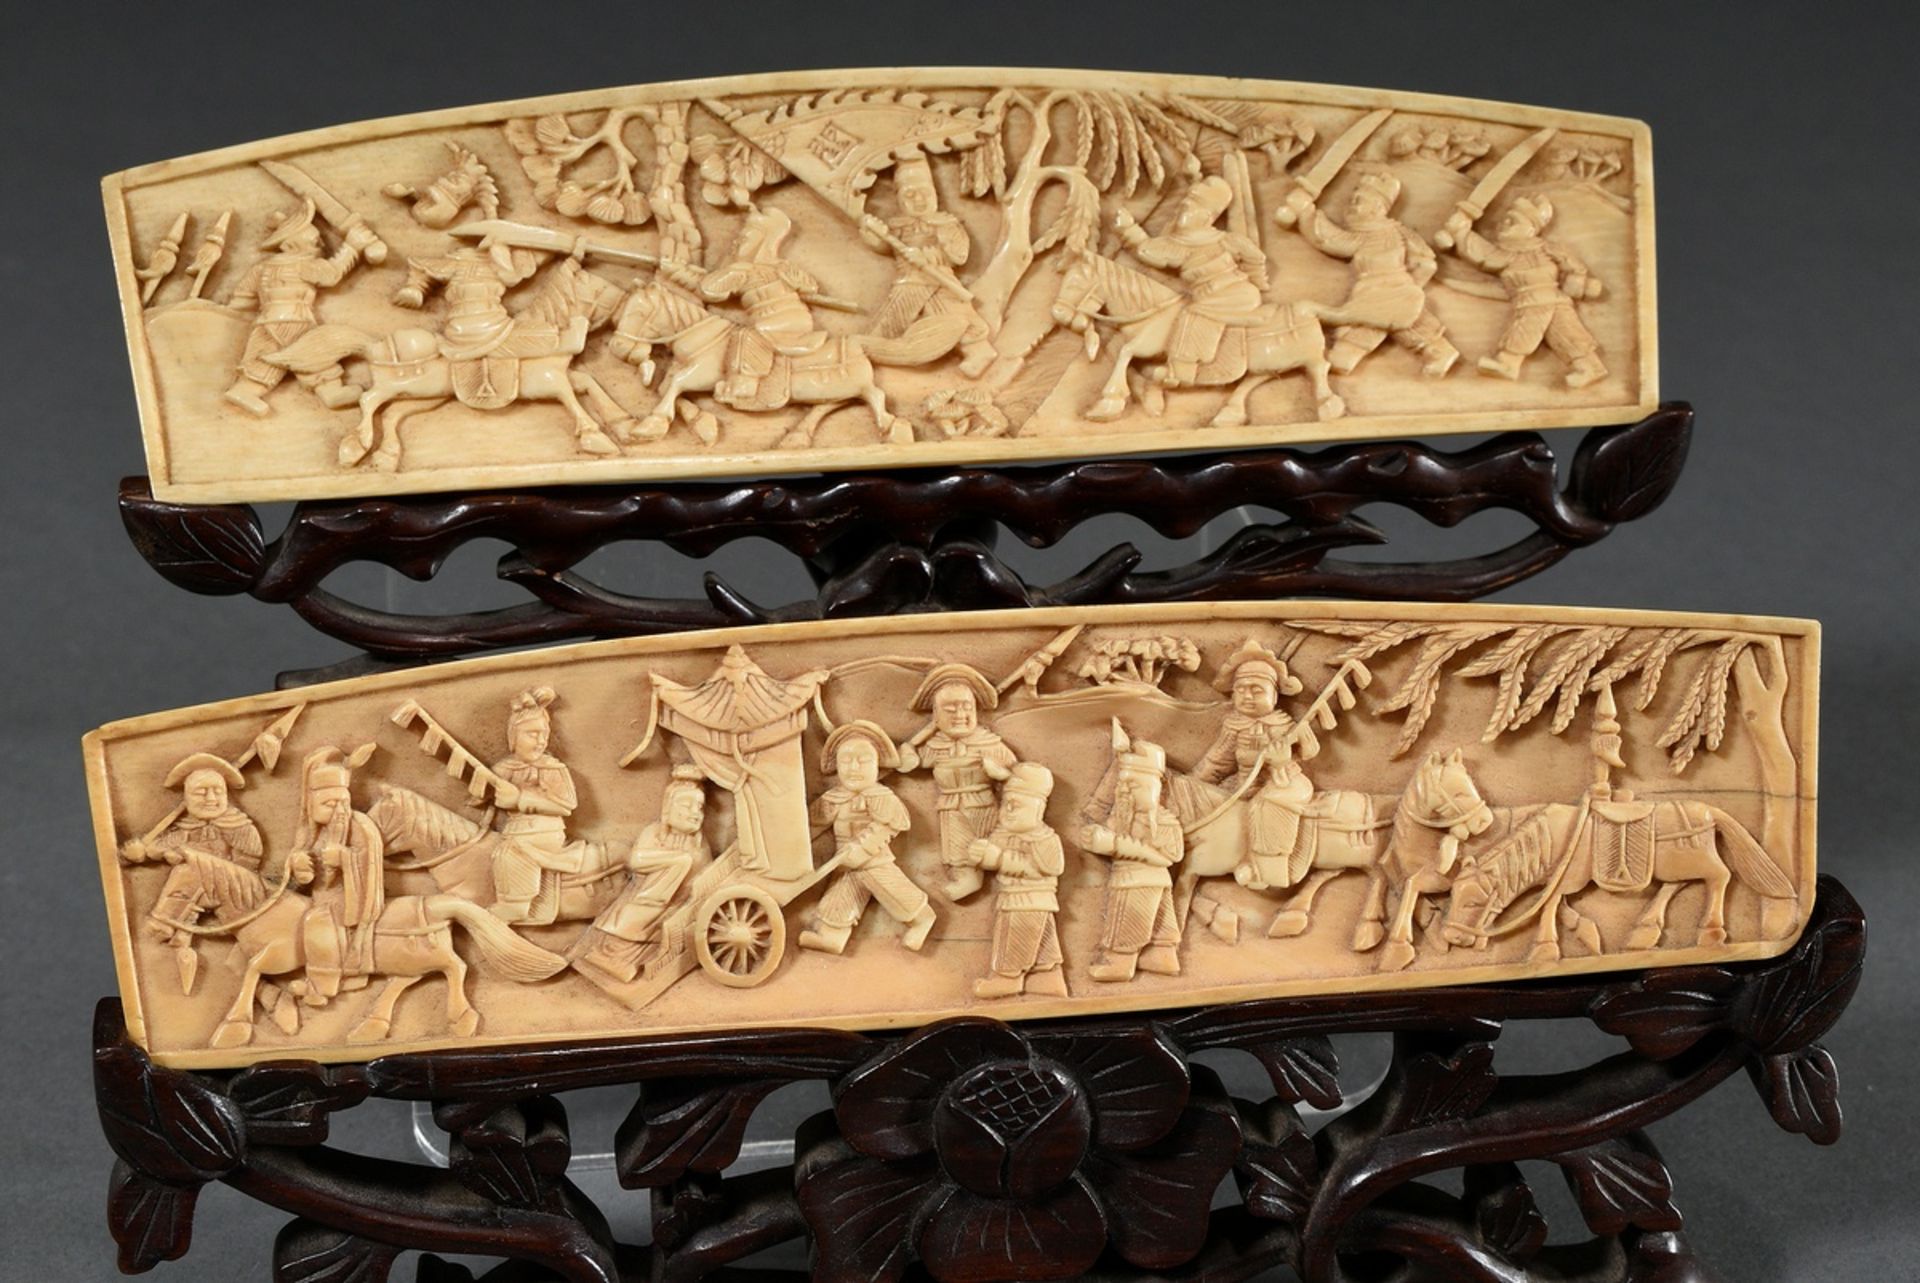 2 Various ivory relief carvings "Battle scene and "Prince's procession in Ming style", carved bases - Image 3 of 13